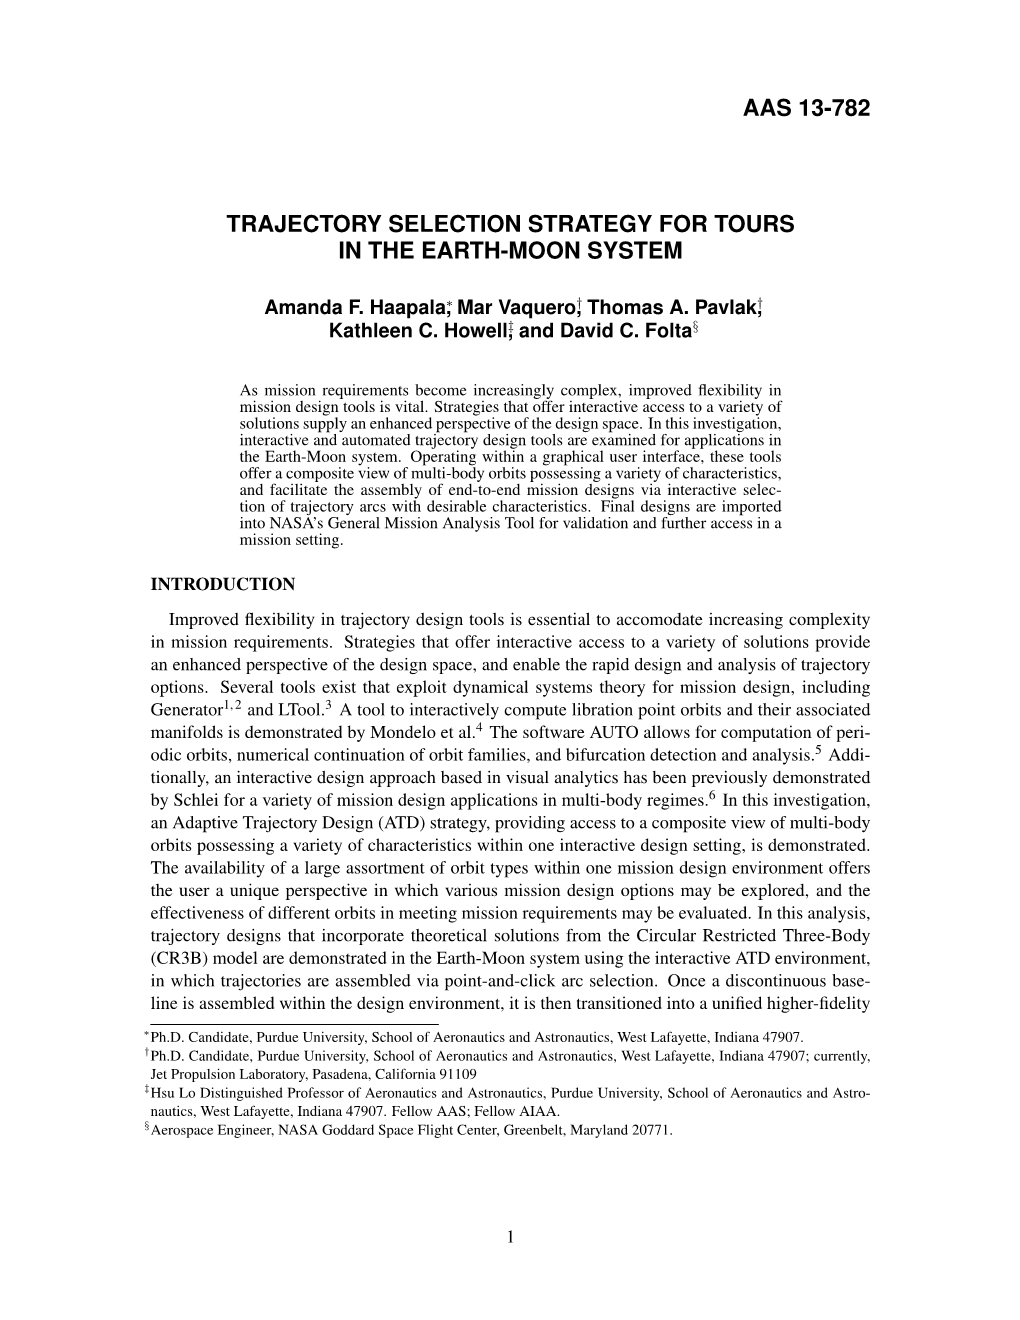 Trajectory Selection Strategy for Tours in the Earth-Moon System